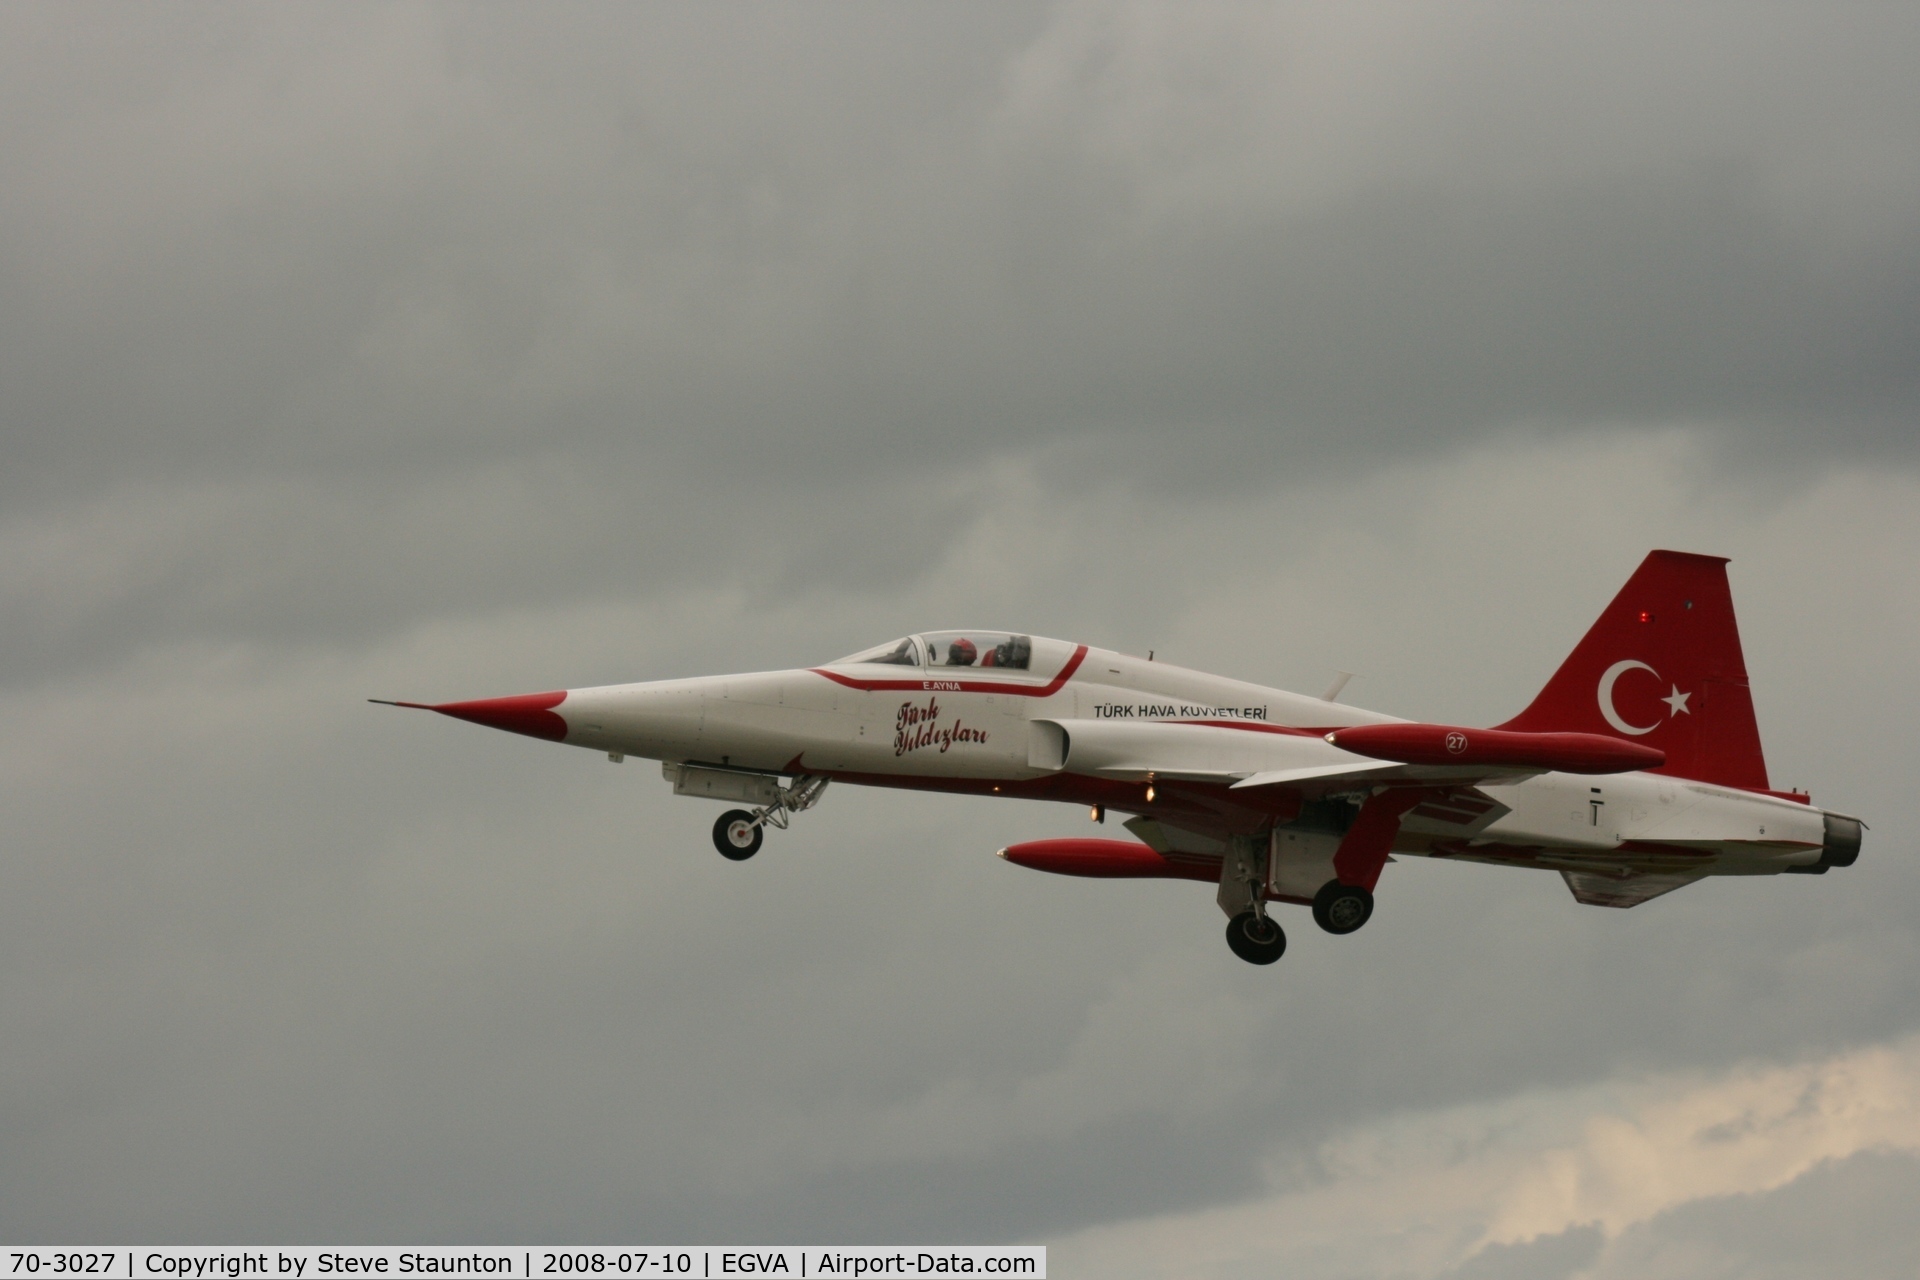 70-3027, Northrop NF-5A Freedom Fighter C/N 3027, Taken at the Royal International Air Tattoo 2008 during arrivals and departures (show days cancelled due to bad weather)